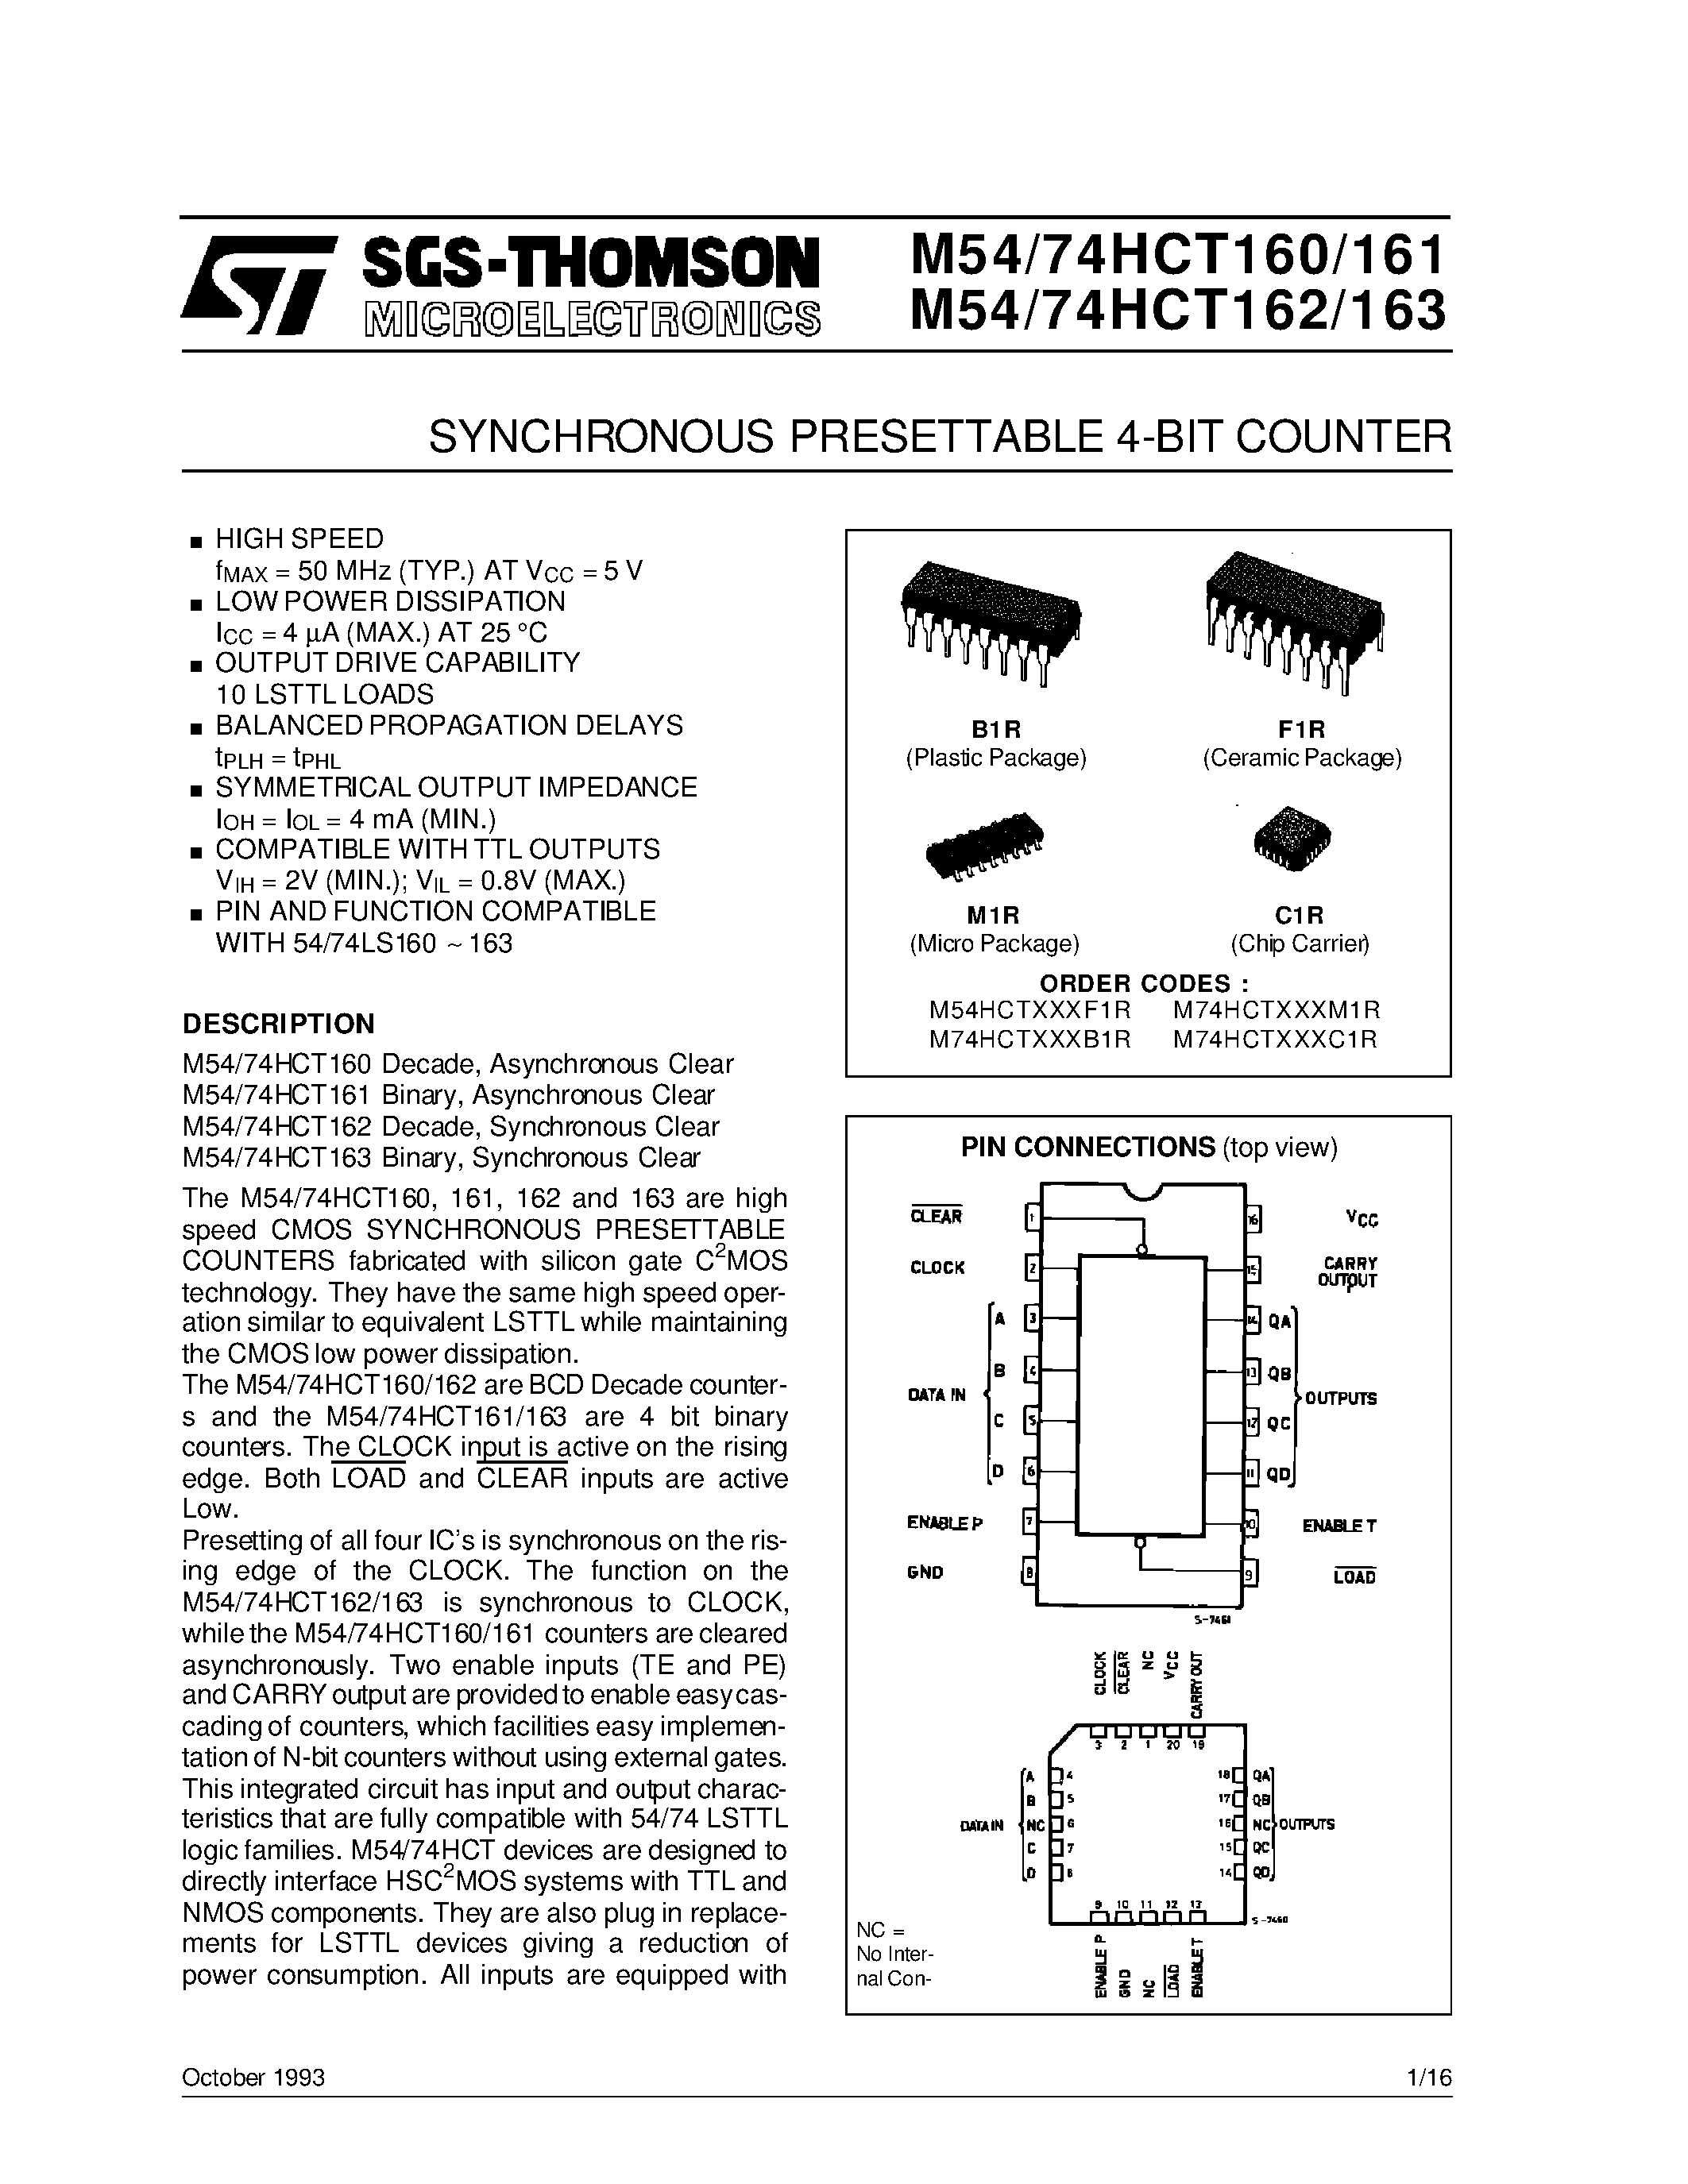 Datasheet M74HCT160 - SYNCHRONOUS PRESETTABLE 4-BIT COUNTER page 1